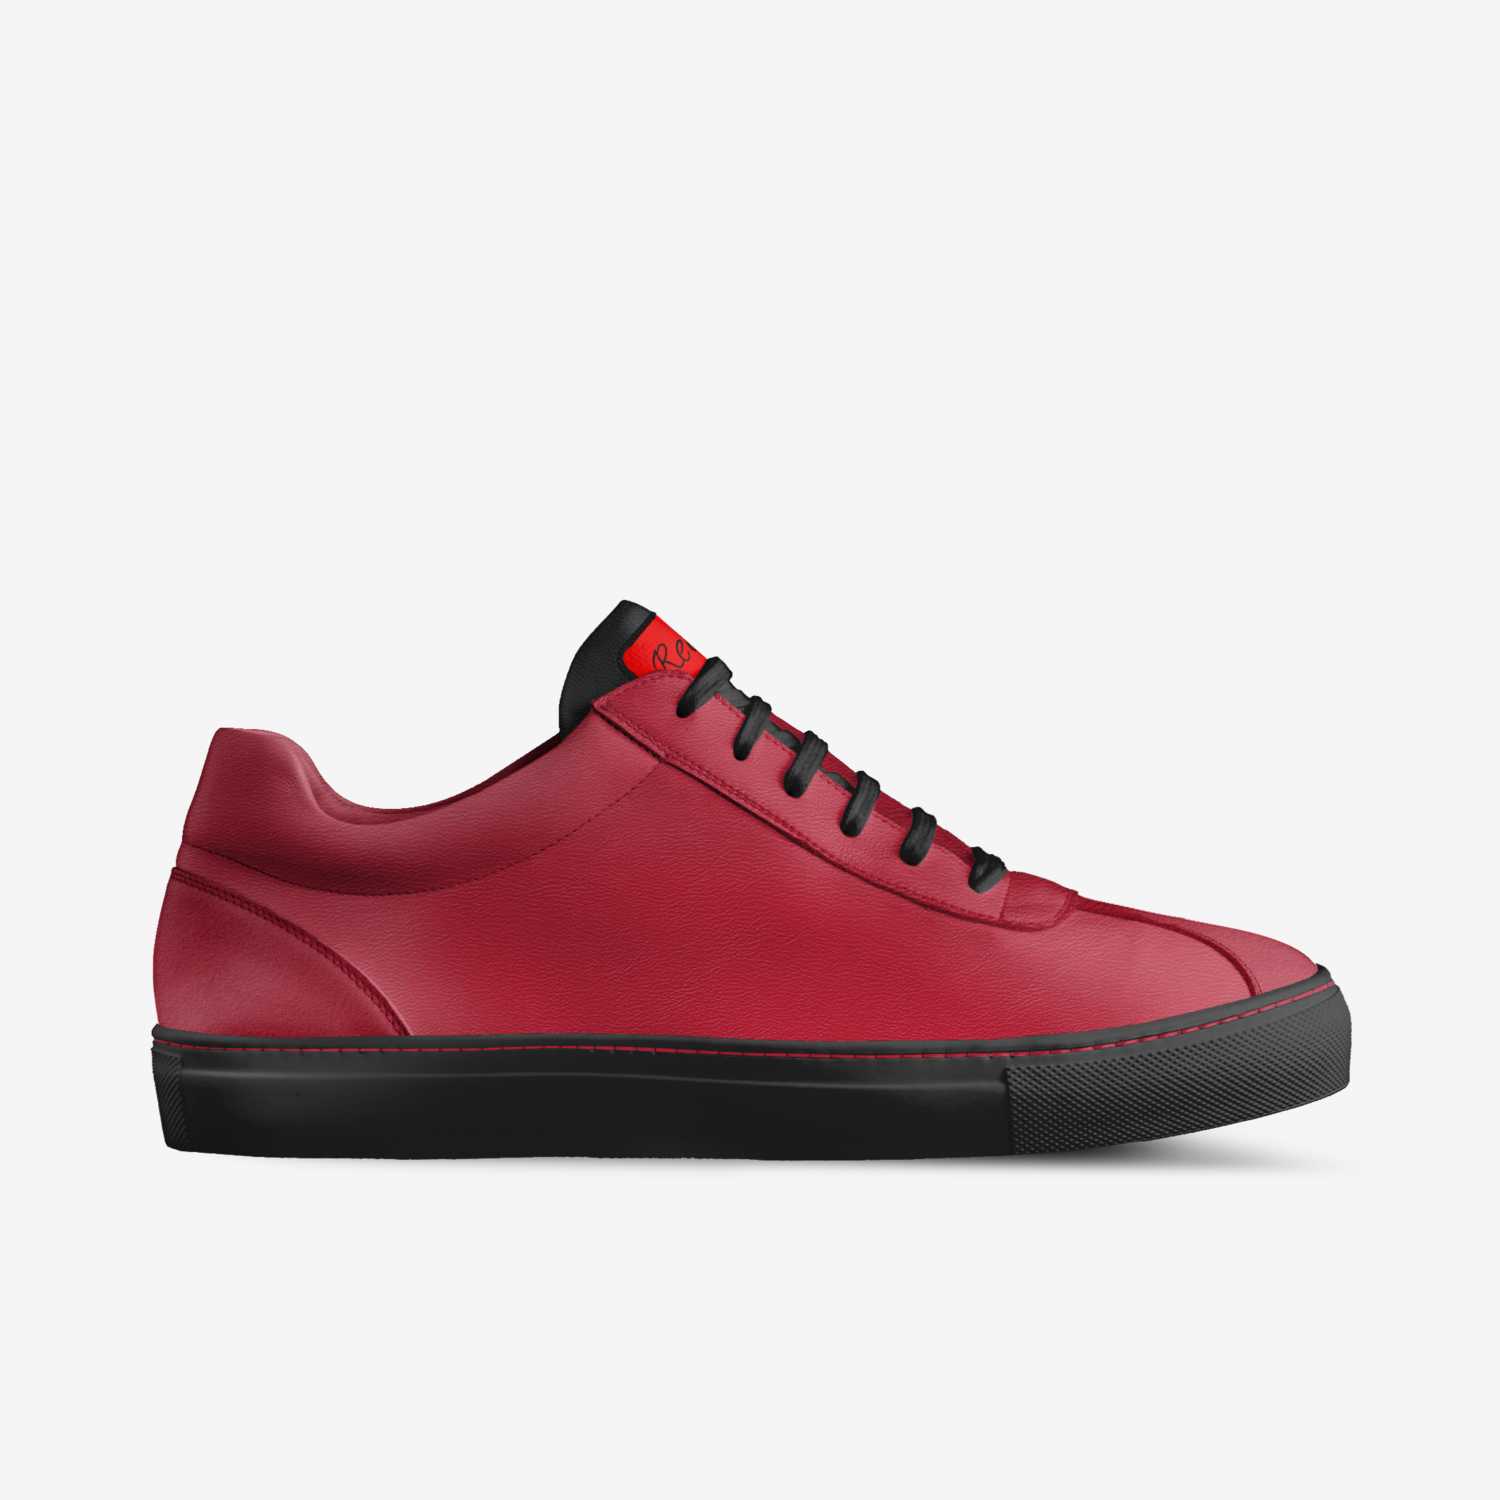 RED 7 | A Custom Shoe concept by Toure Zelle